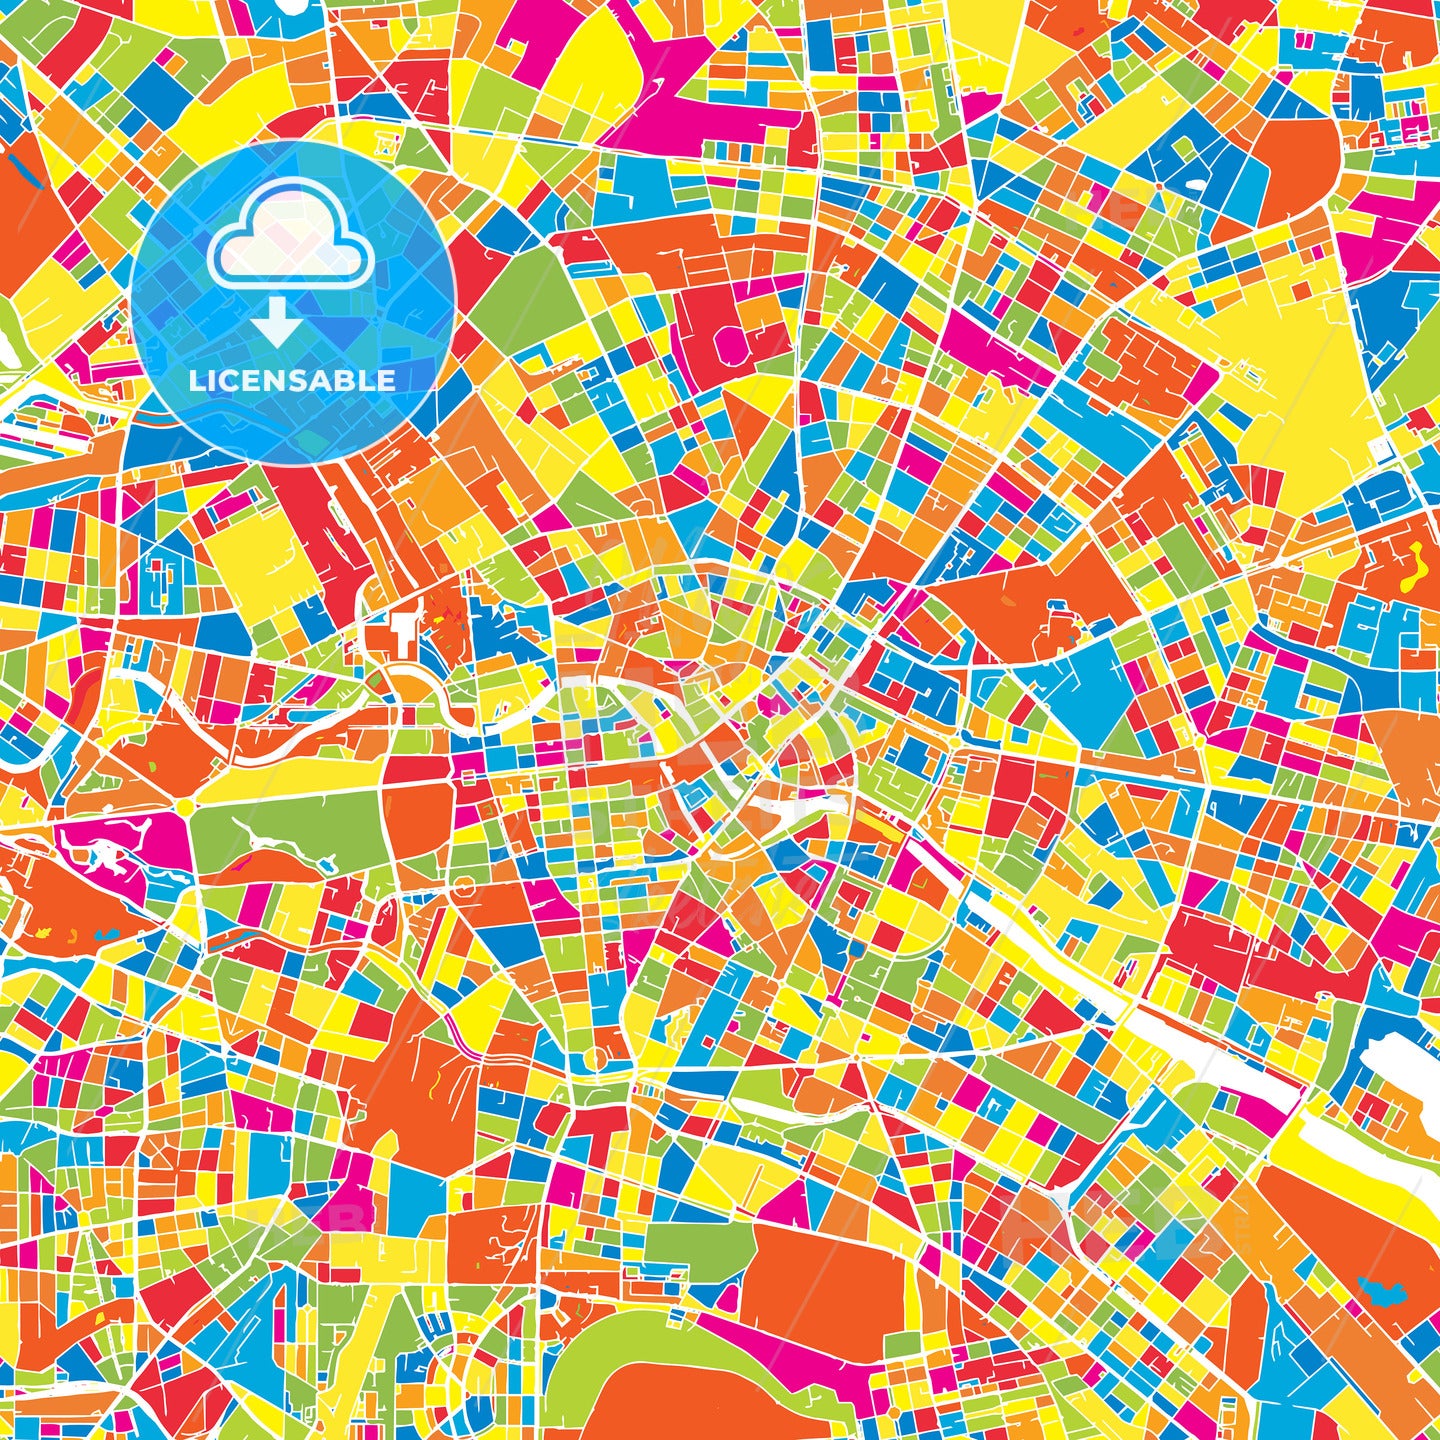 Berlin, Germany, colorful vector map